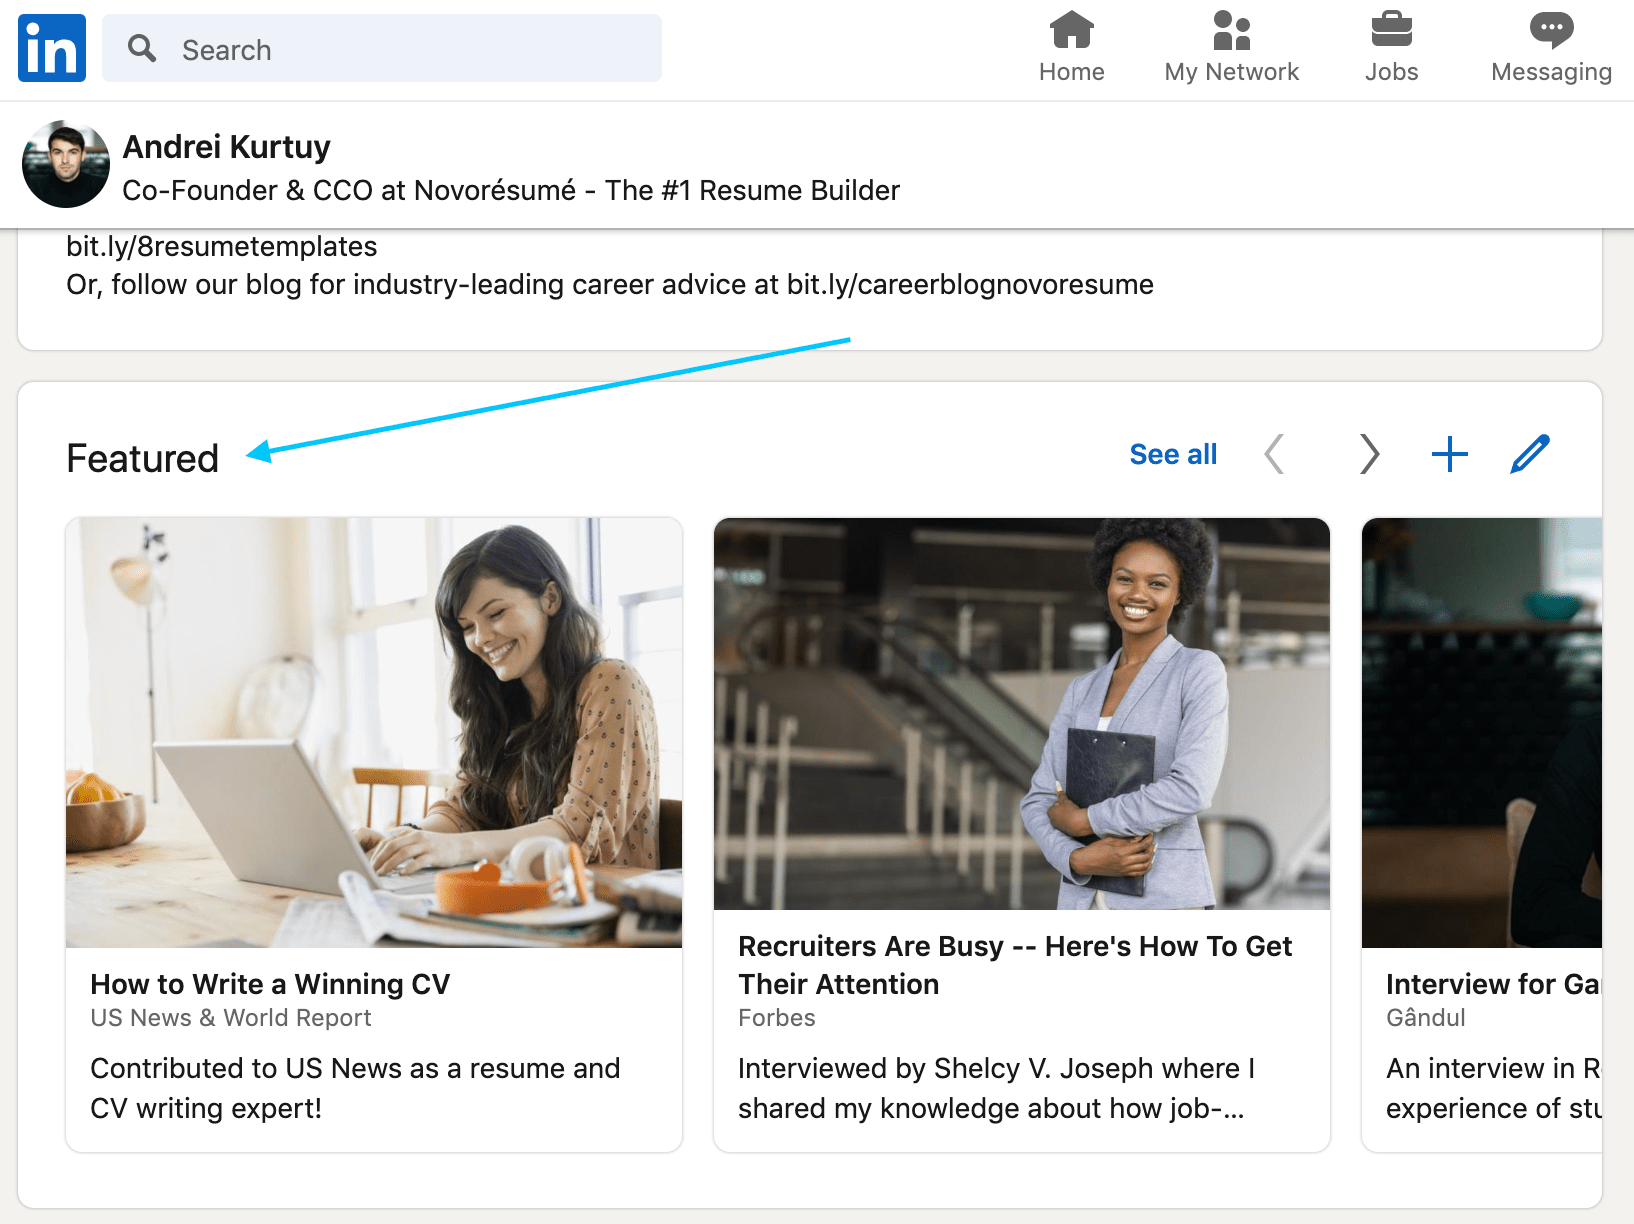 linkedin featured section